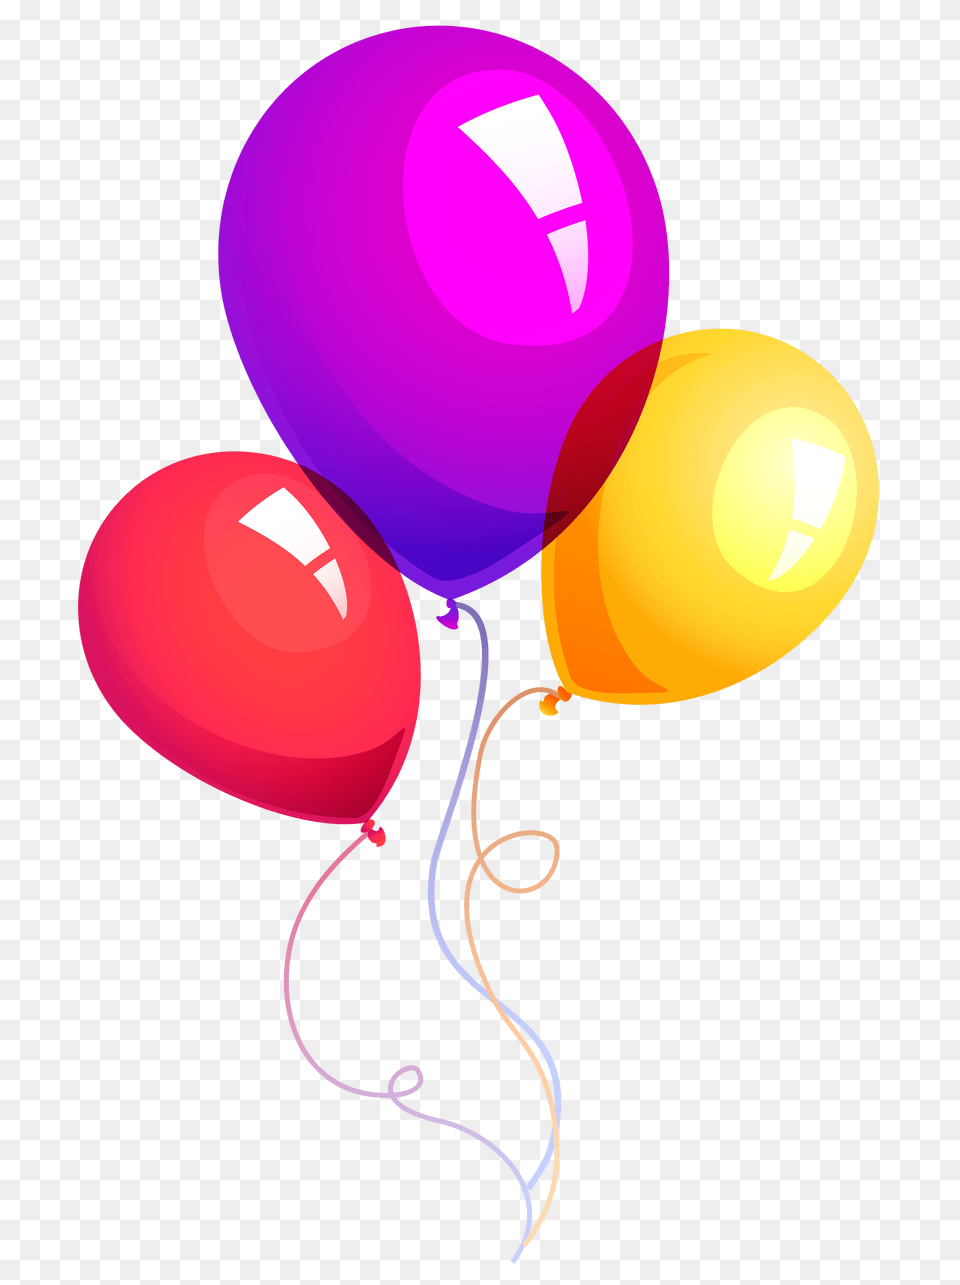 Pngpix Com Balloons Balloon, Dynamite, Weapon Png Image